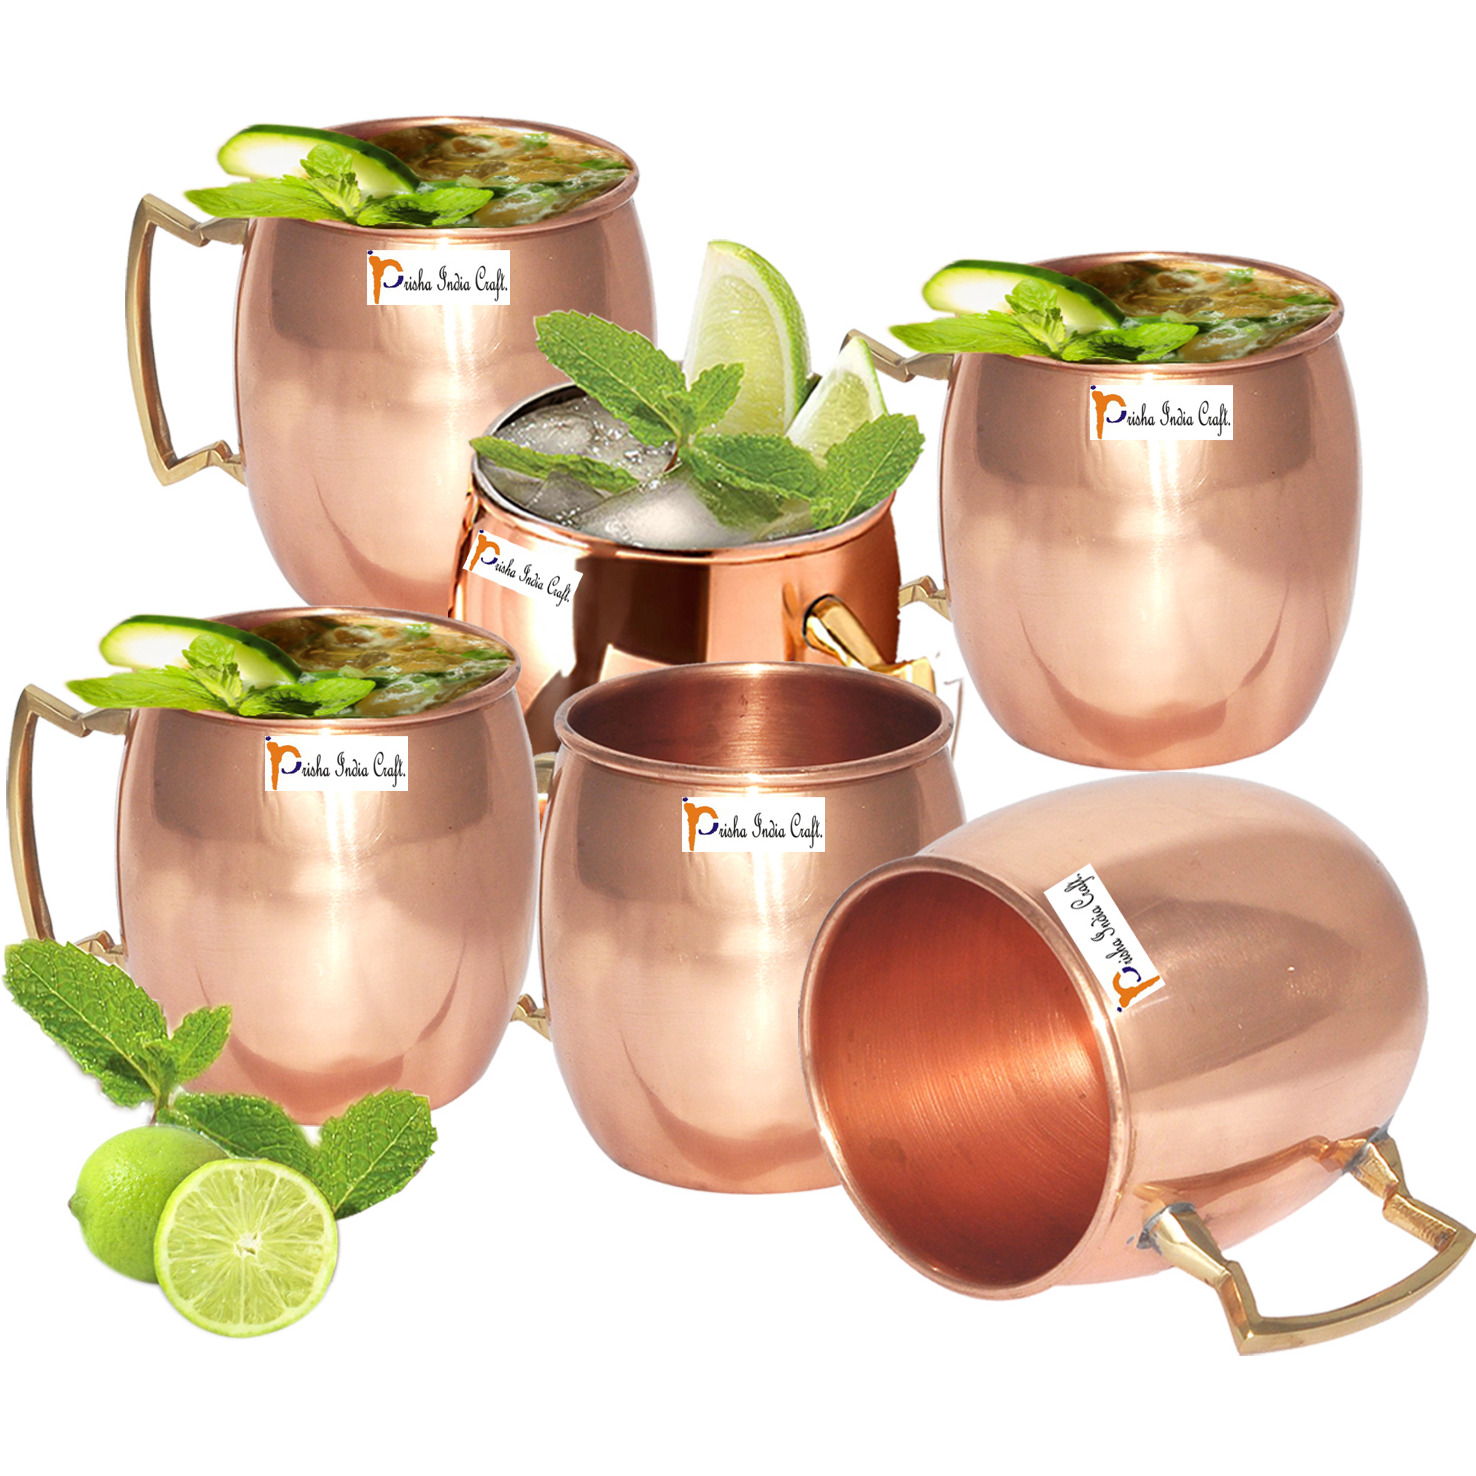 Set of 6 - Prisha India Craft B. Solid Copper Mug for Moscow Mules 550 ML / 18 oz 100% Pure Copper Best Quality Lacquered Finish Mule Cup, Moscow Mule Cocktail Cup, Copper Mugs, Cocktail Mugs